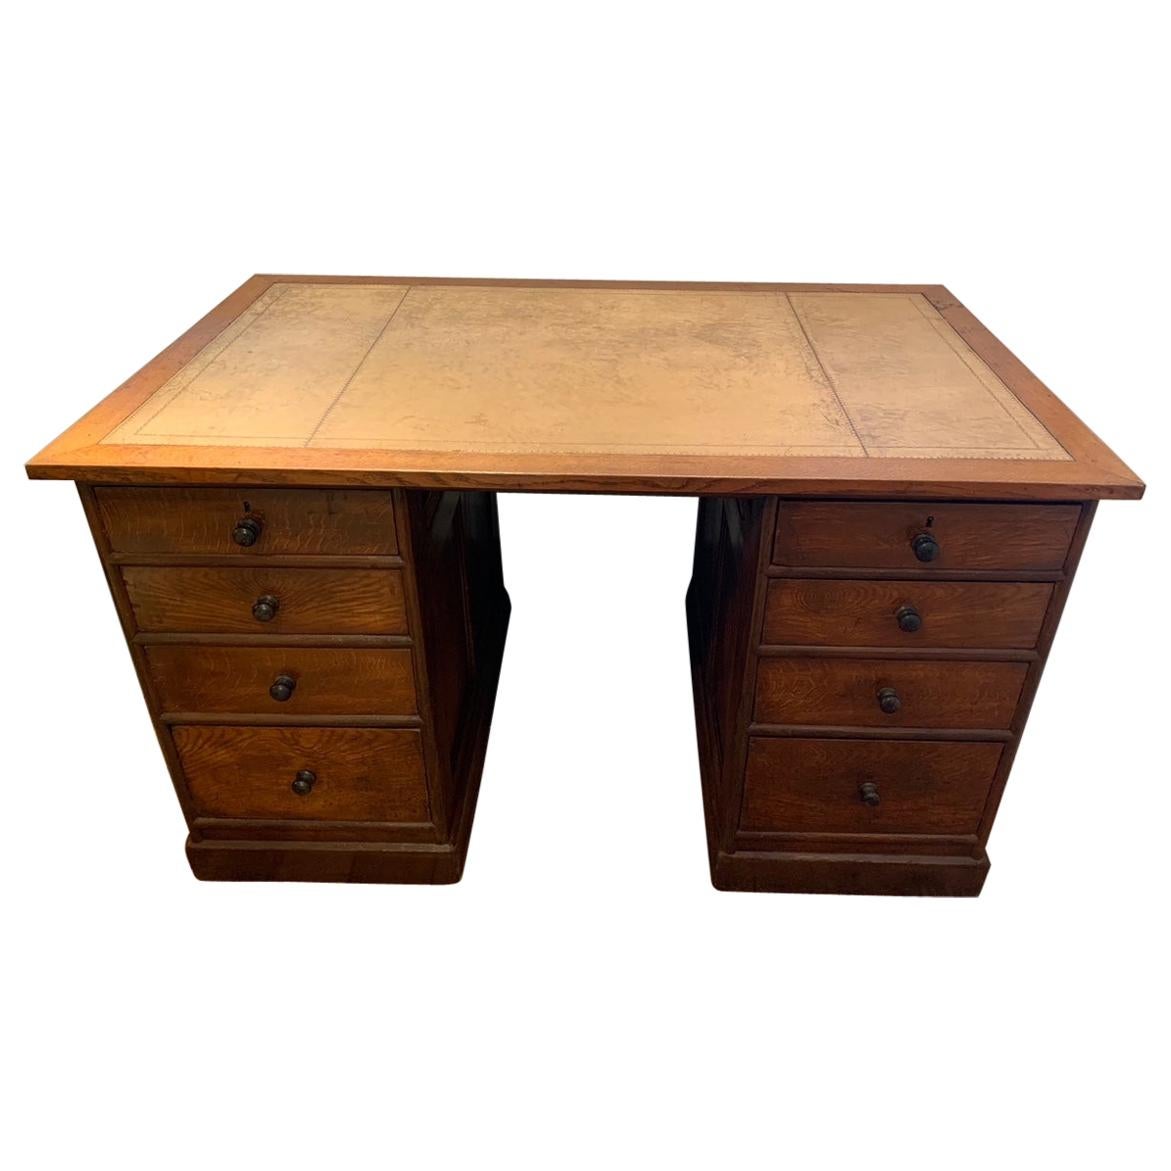 Handsome 19th Century English Double Pedestal Desk with Tan Leather Top